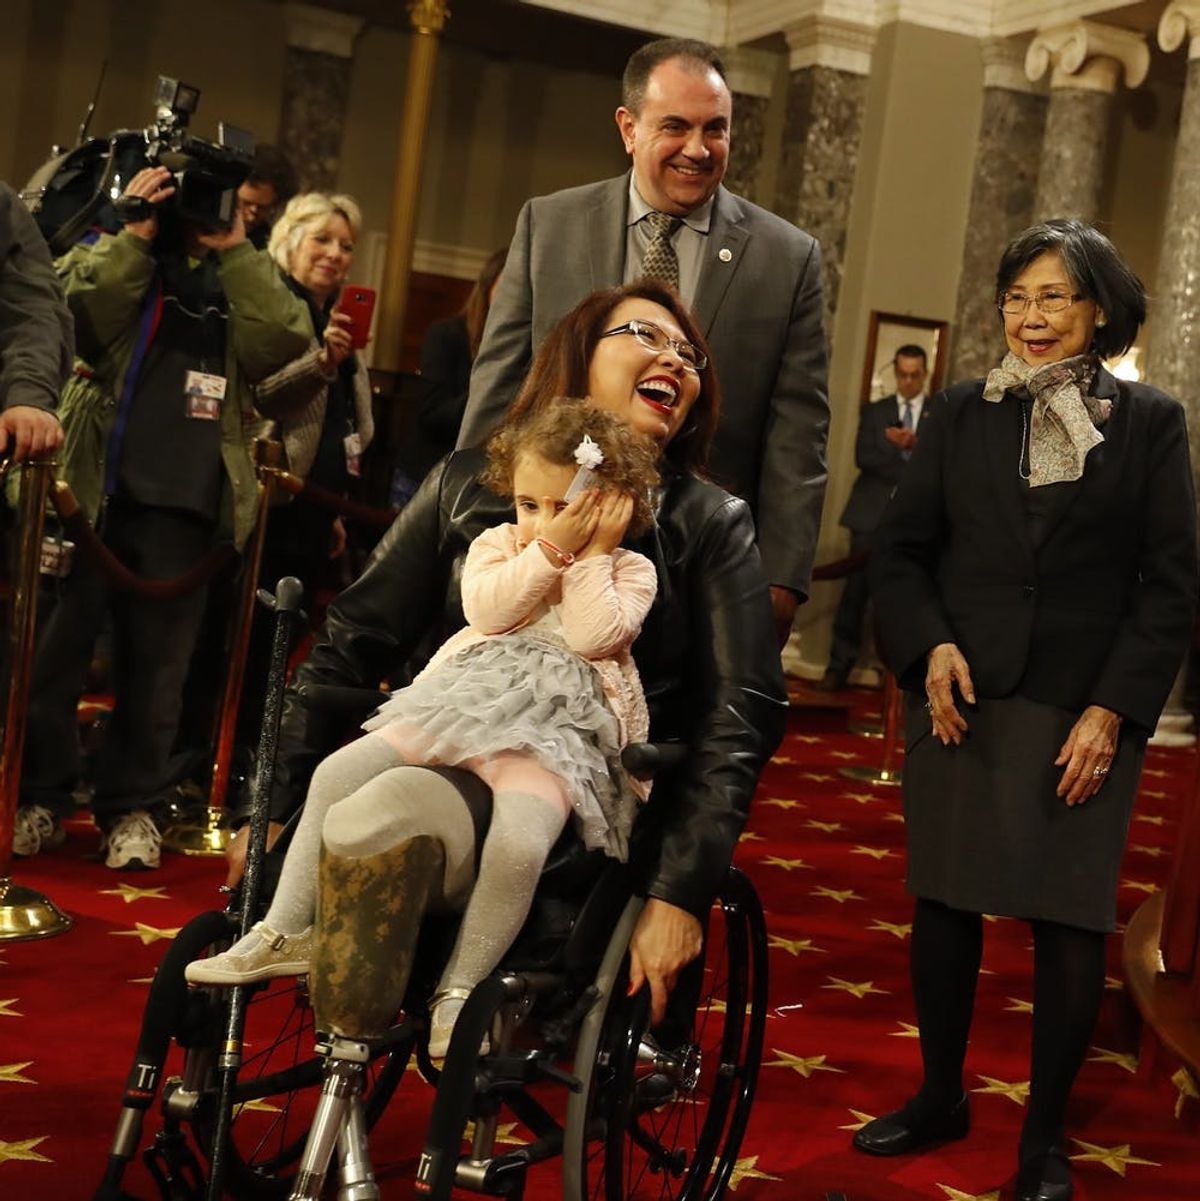 Tammy Duckworth’s Pregnancy Points to the Lack of Young Women in Congress